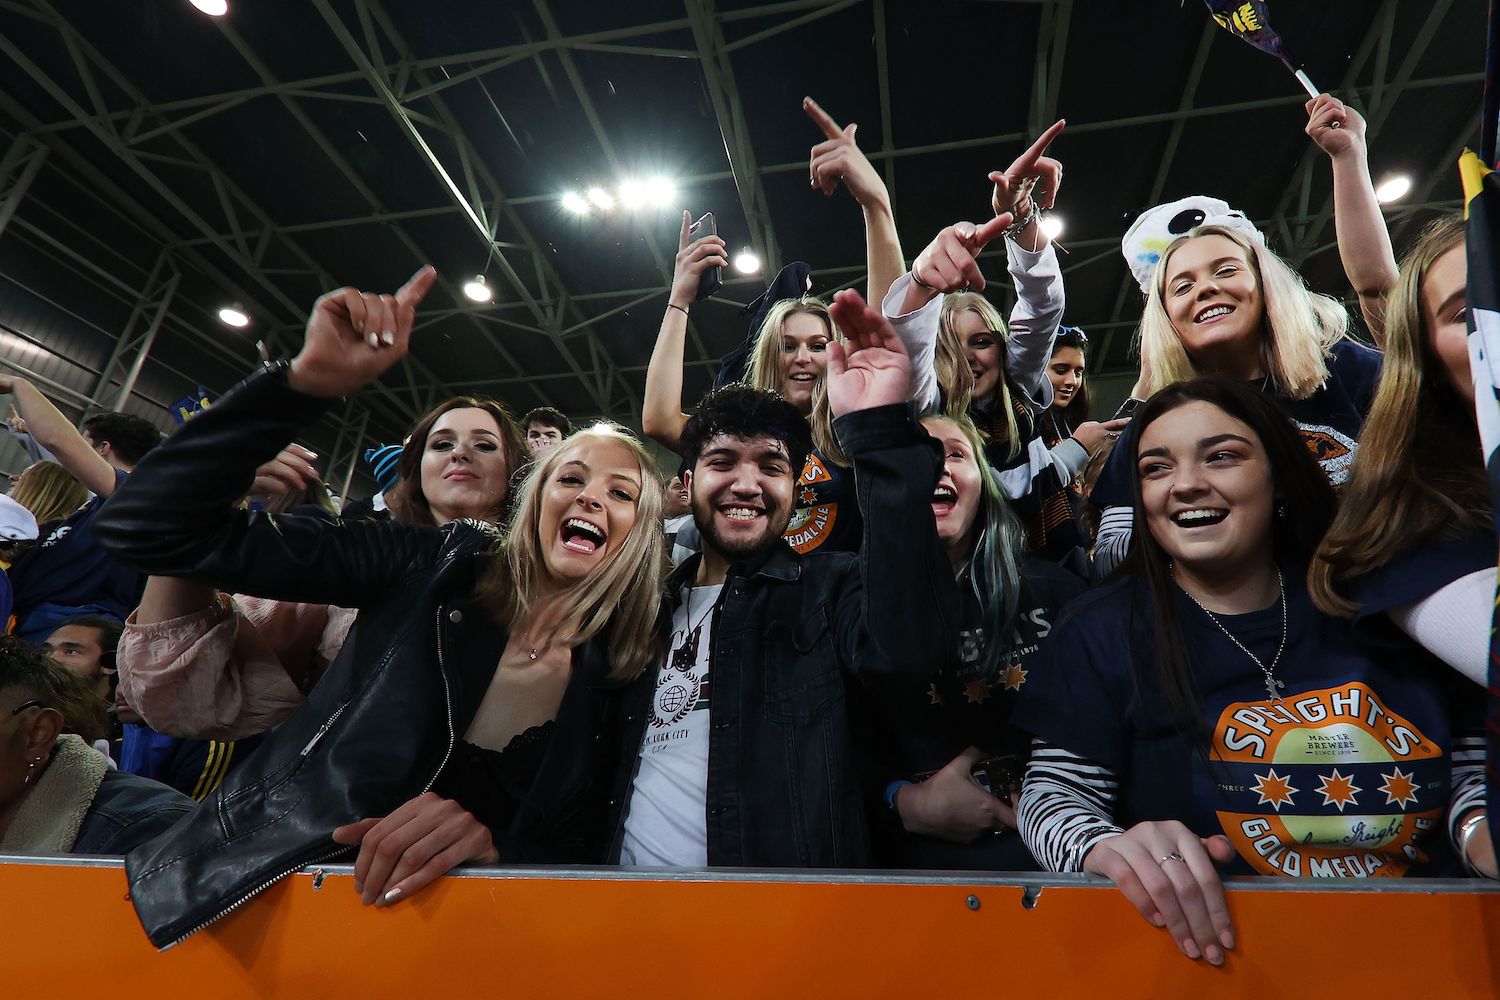 Fans attend the Super Rugby match between the Otago Highlanders and Waikato Chiefs at Forsyth Barr Stadium in Dunedin on June 13, 2020. (Photo by Marty MELVILLE / AFP)